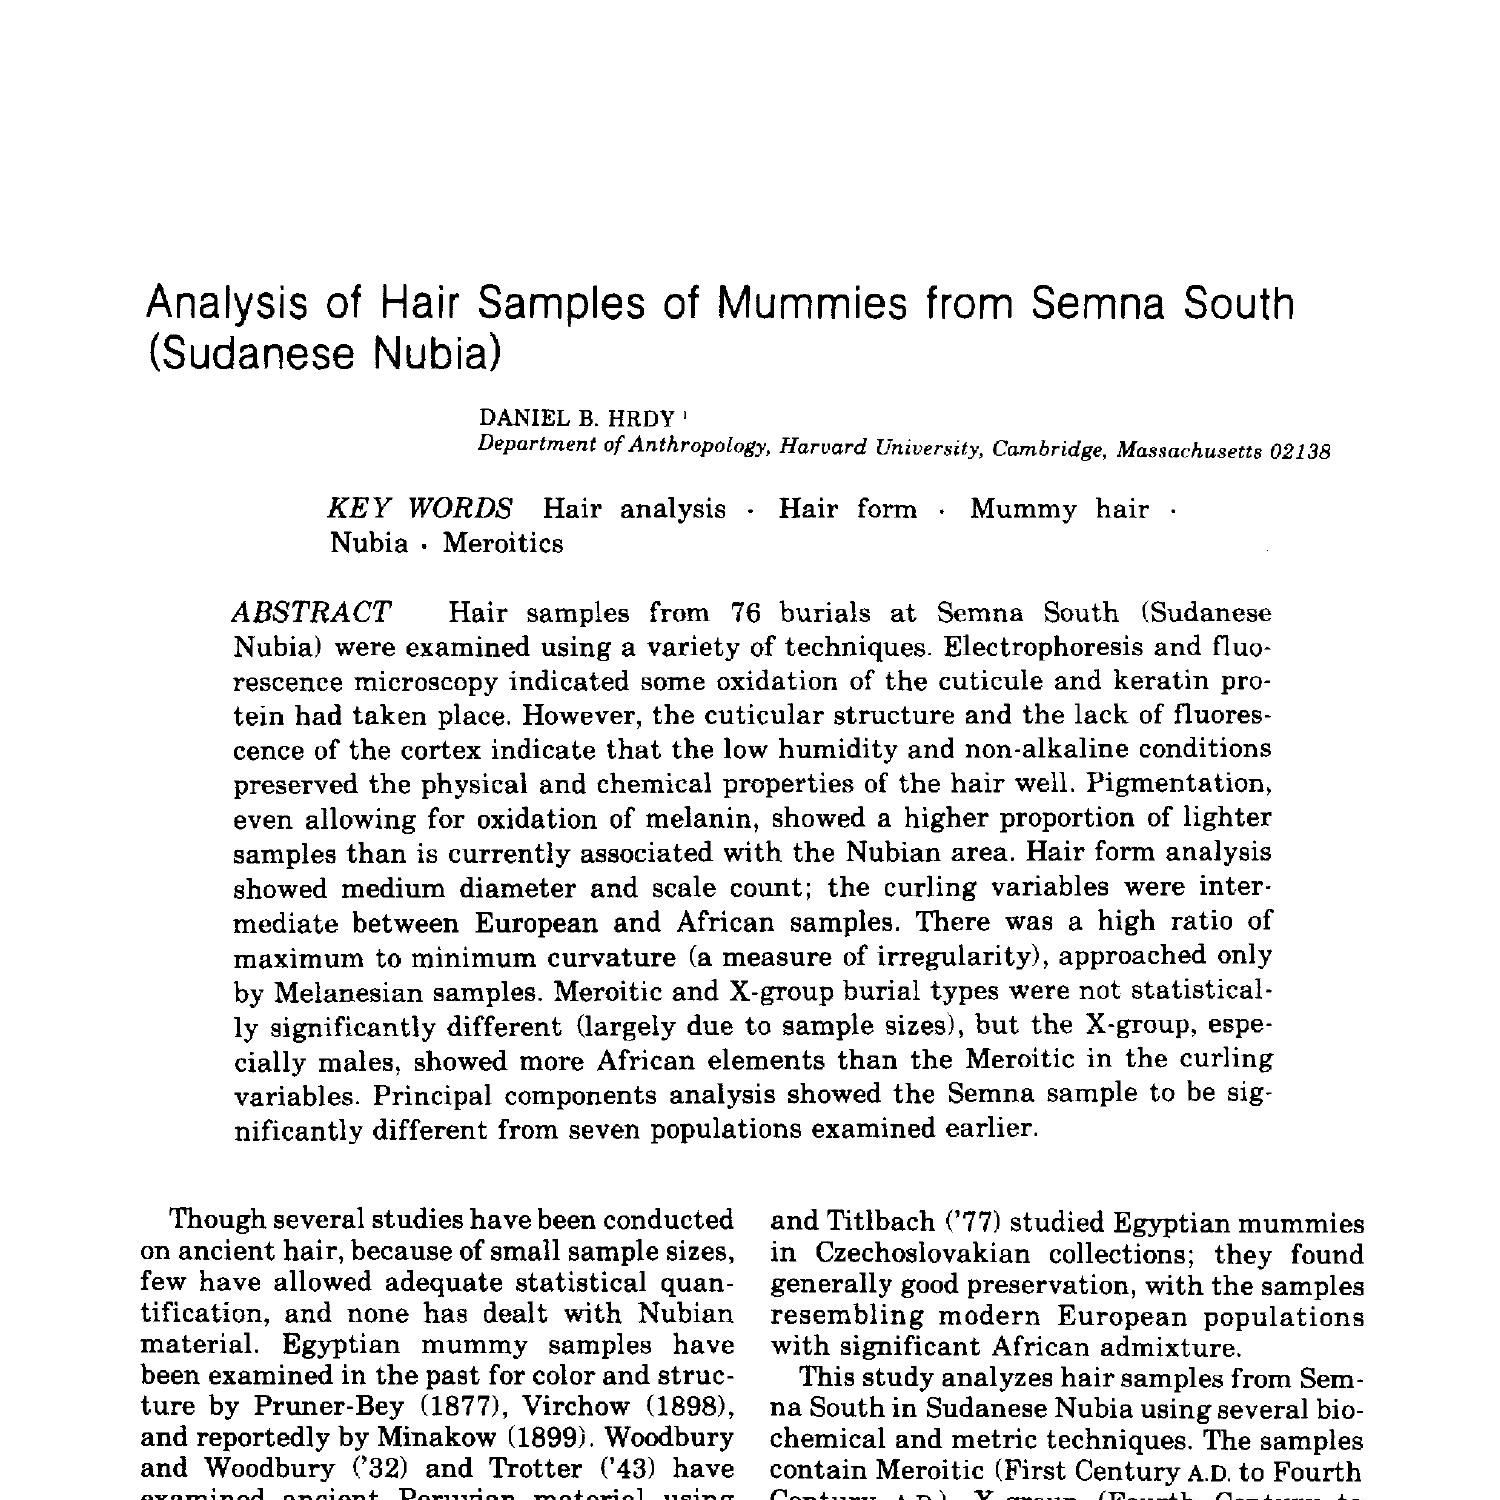 Analysis of Hair Samples of Mummies from Semna South (Sudanese Nubia) (HRDY  1978).pdf | DocDroid